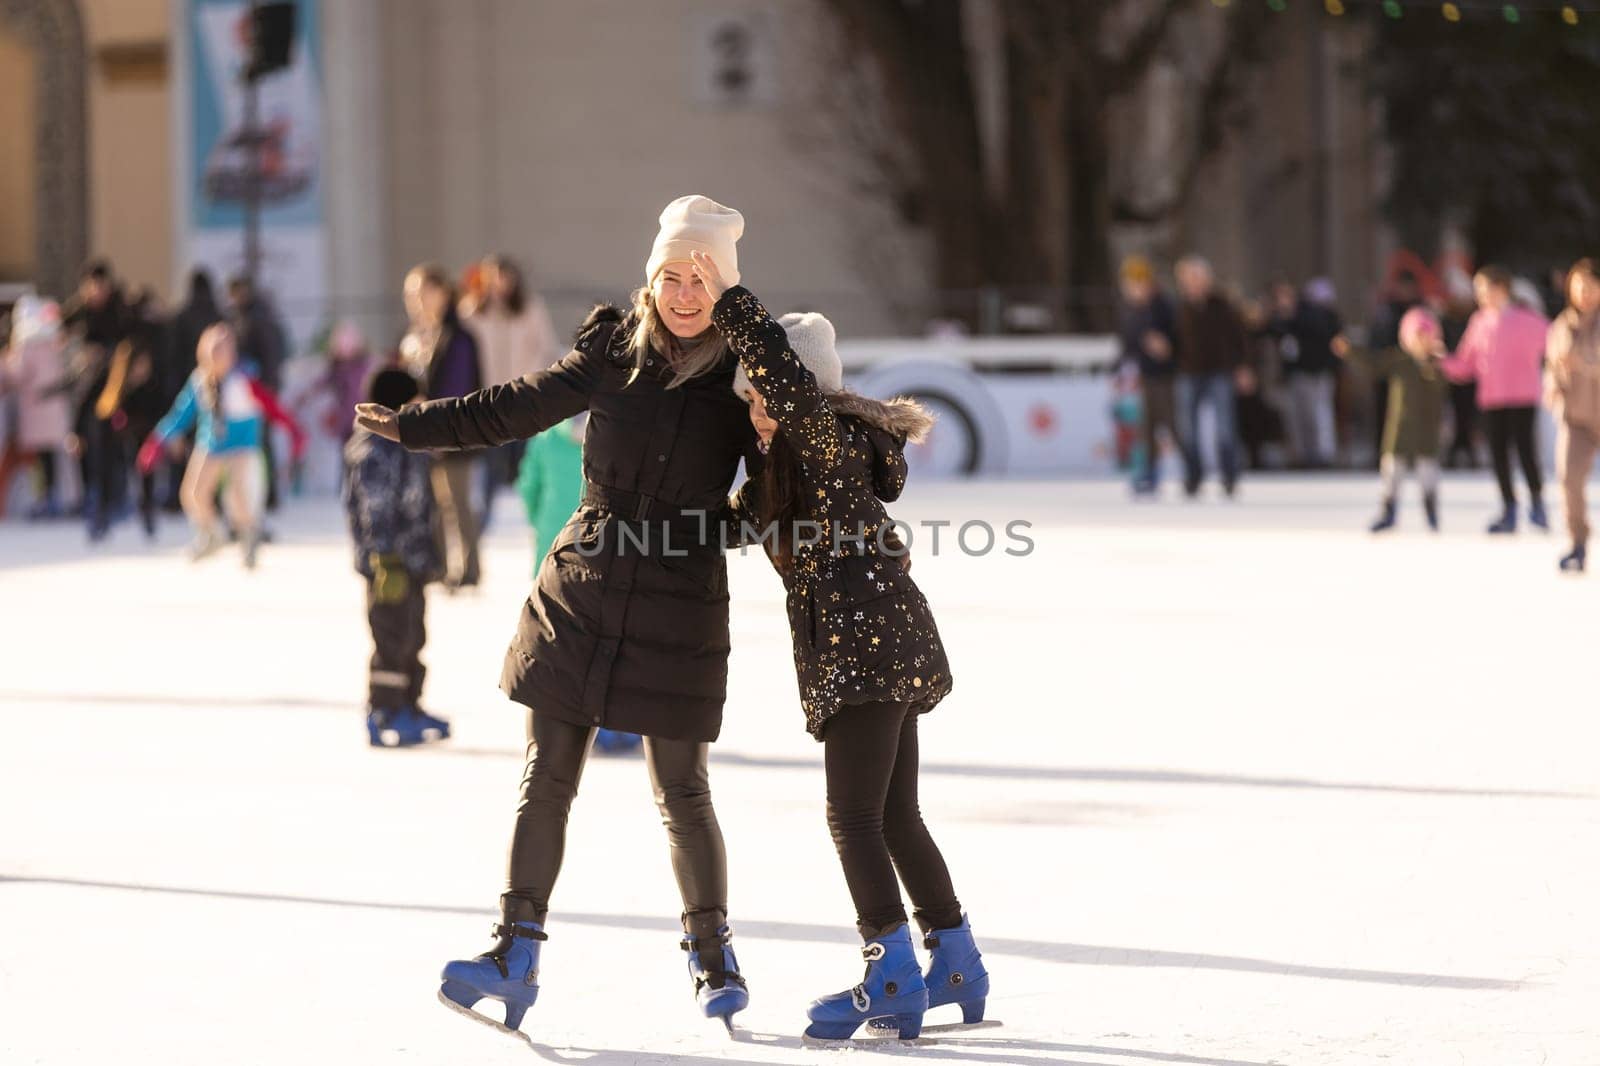 Adorable young mother with her daughter on the ice rink.